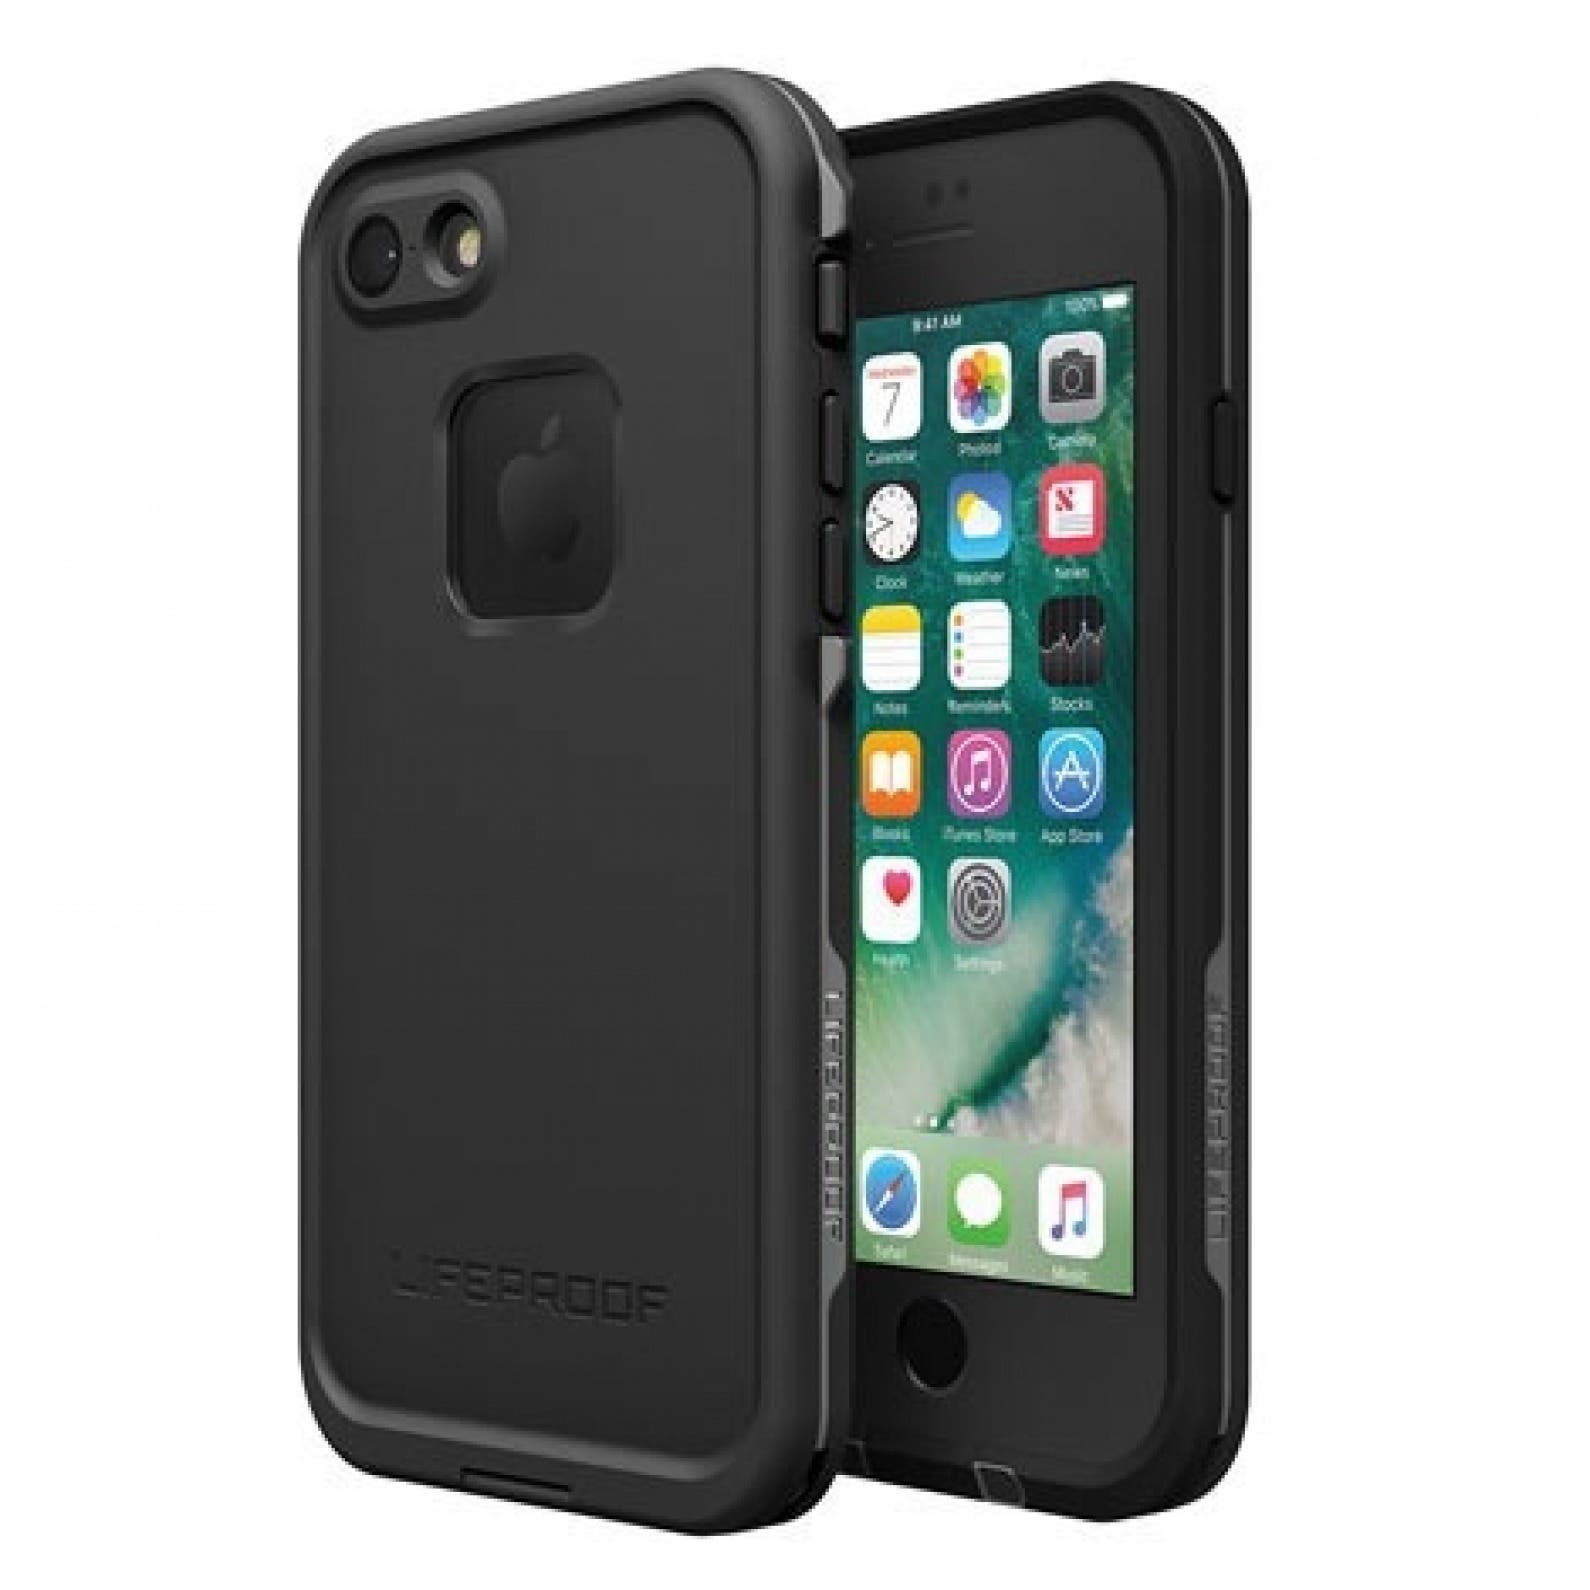 Best Protective Cases for iPhone 7 & 7 Plus: Rugged, Waterproof ...